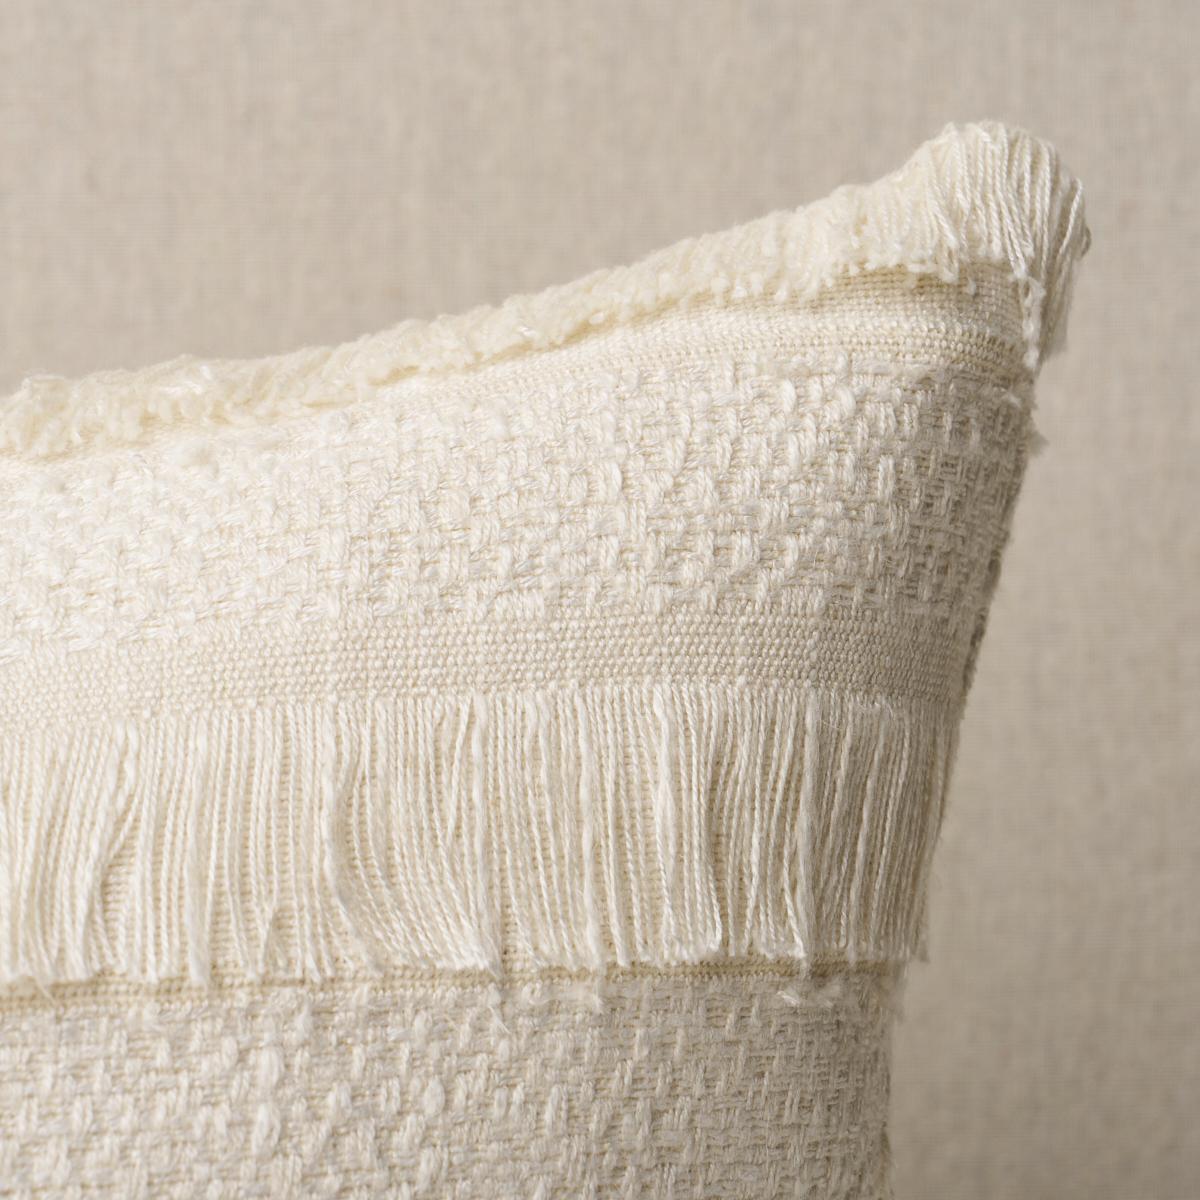 This pillow features Acadia with a knife edge finish. A horizontal fringed stripe, this pattern derives from a textile in our archives. Beautifully woven with silky mélange yarn, it has an artisanal look and multi-textural appeal. Pillow includes a